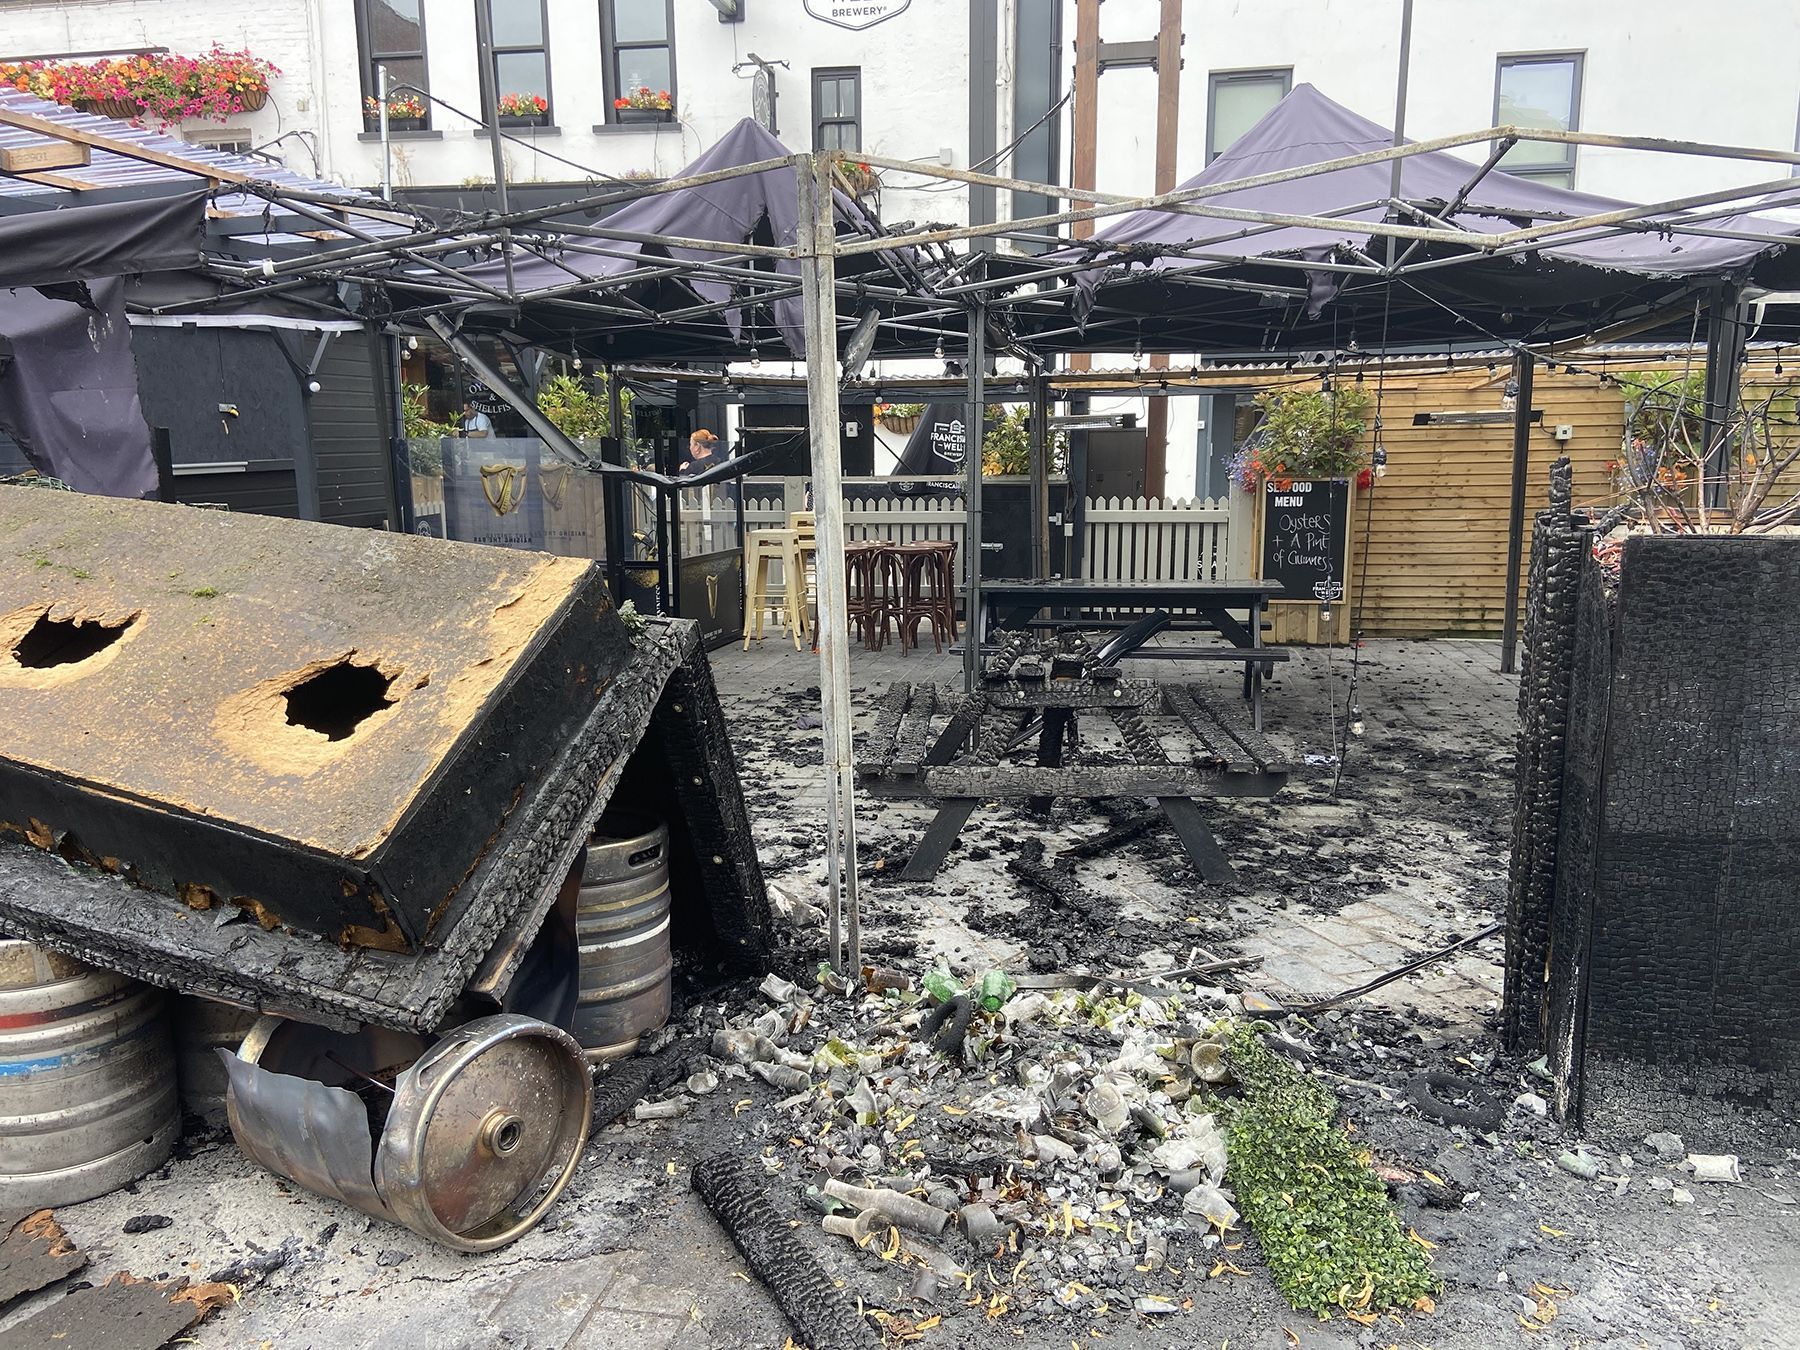 SUSPECTED ARSON: The burning of the Mourne Seafood Bar outdoor area is symptomatic of the city centre\'s decline